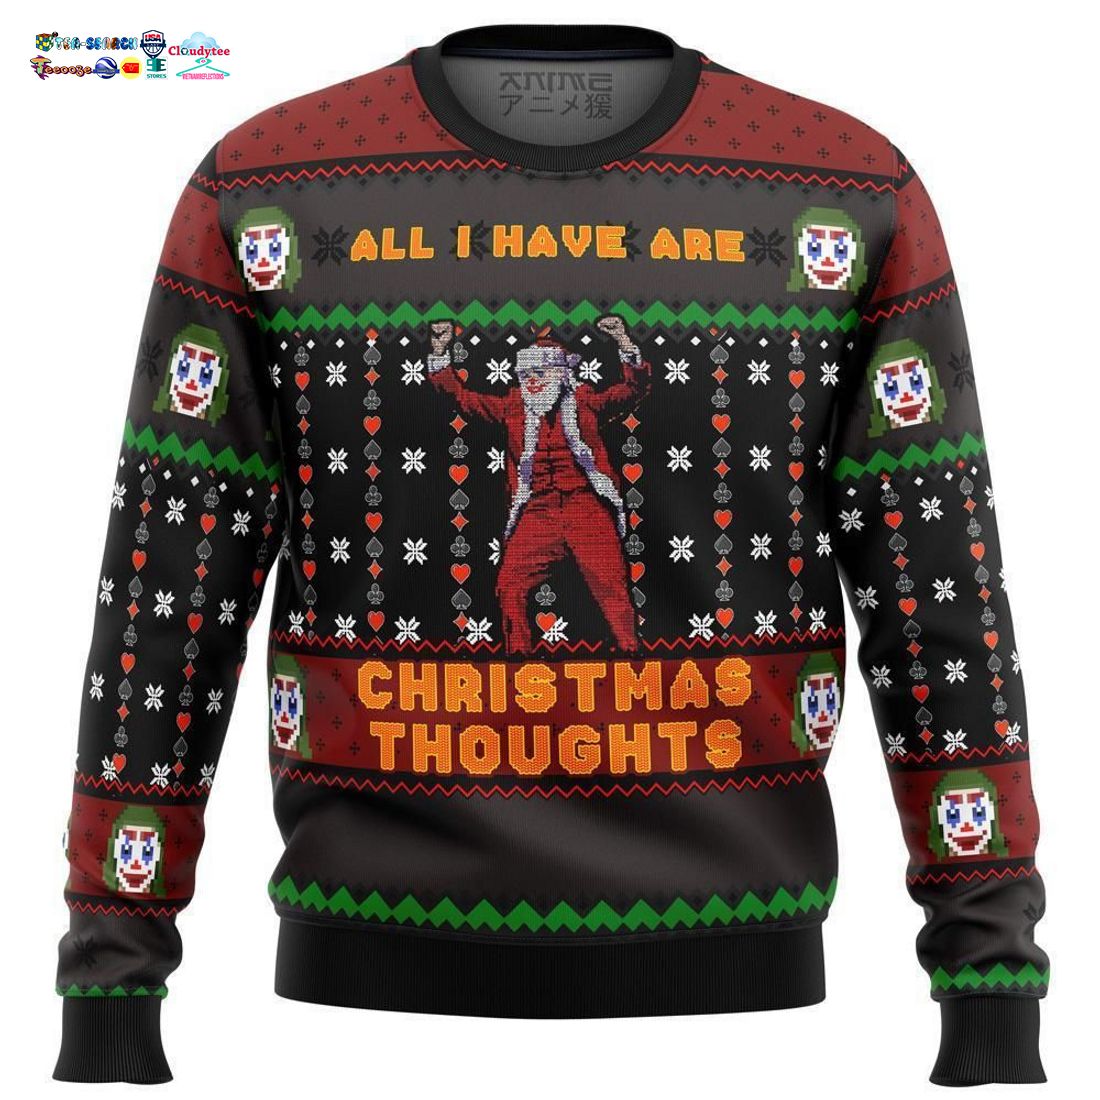 Joker Santa All I Have Are Christmas Thoughts Ugly Christmas Sweater